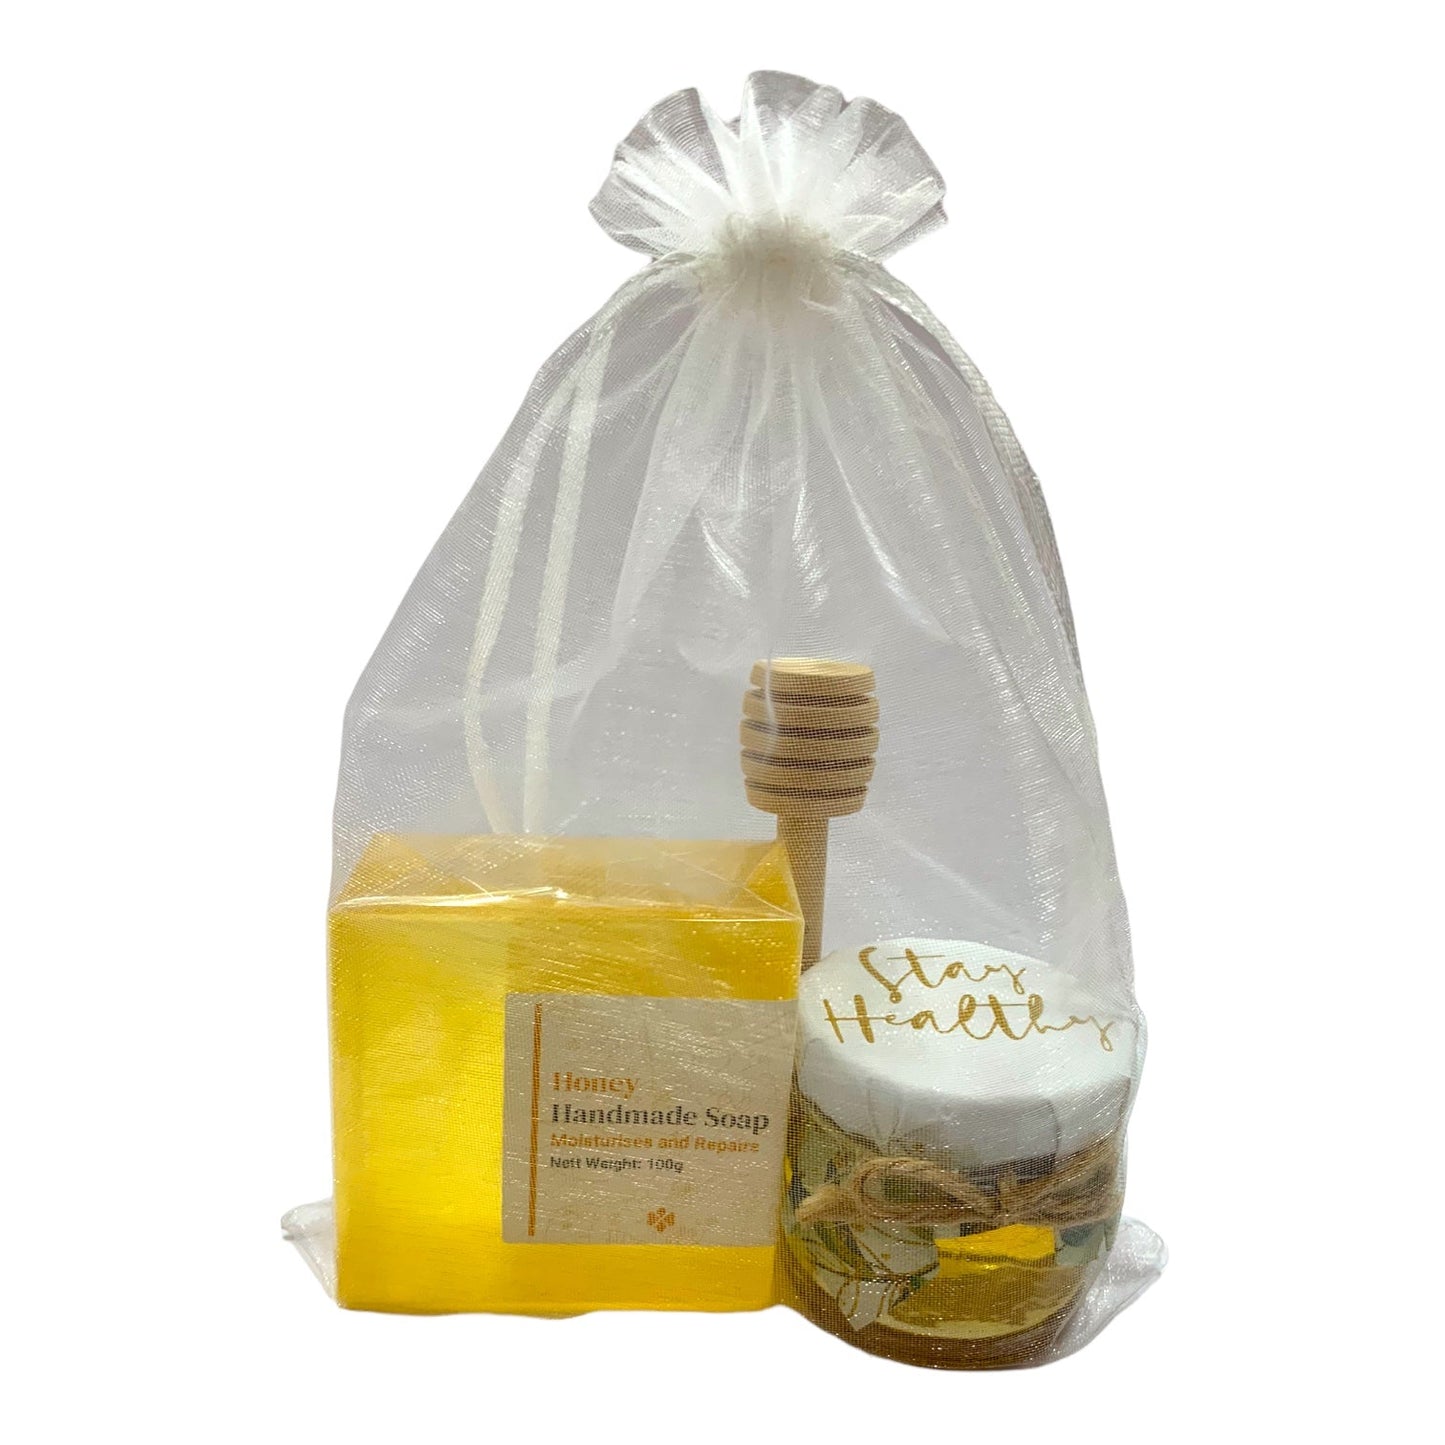 Mini Honey Gifts - Stay Healthy